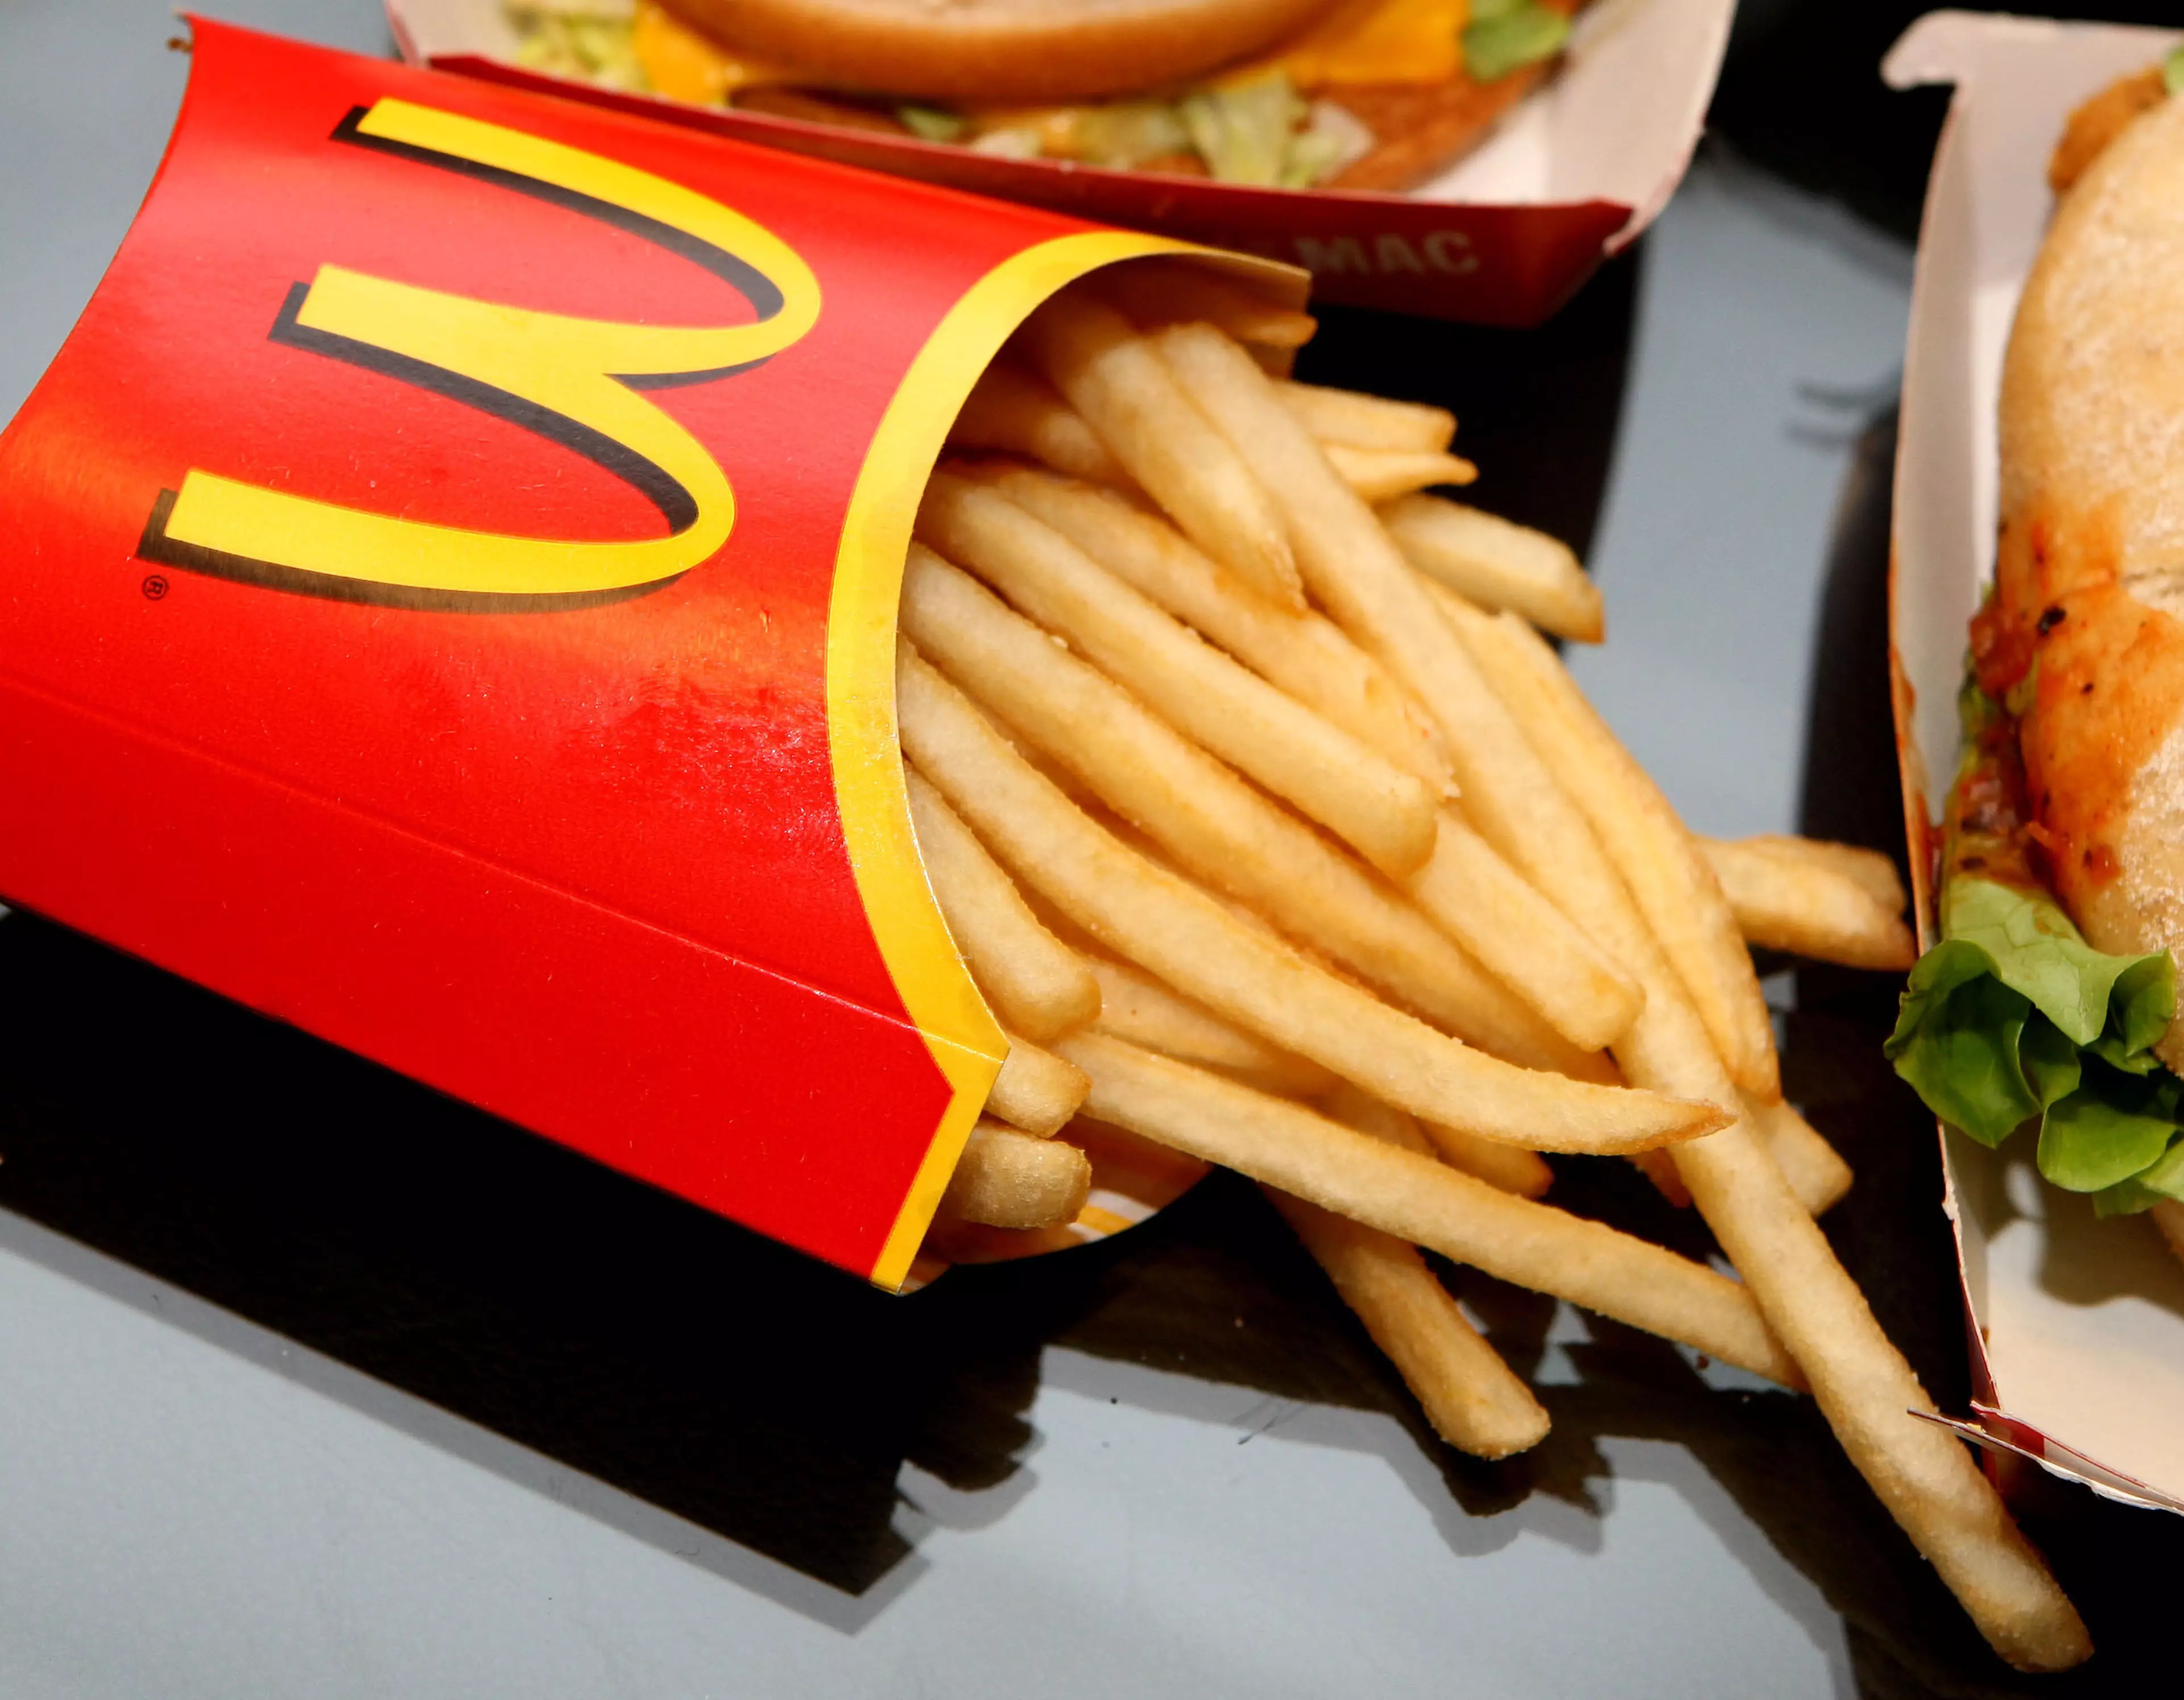 McDonald's Is Going To Alter Half Of Its Menu